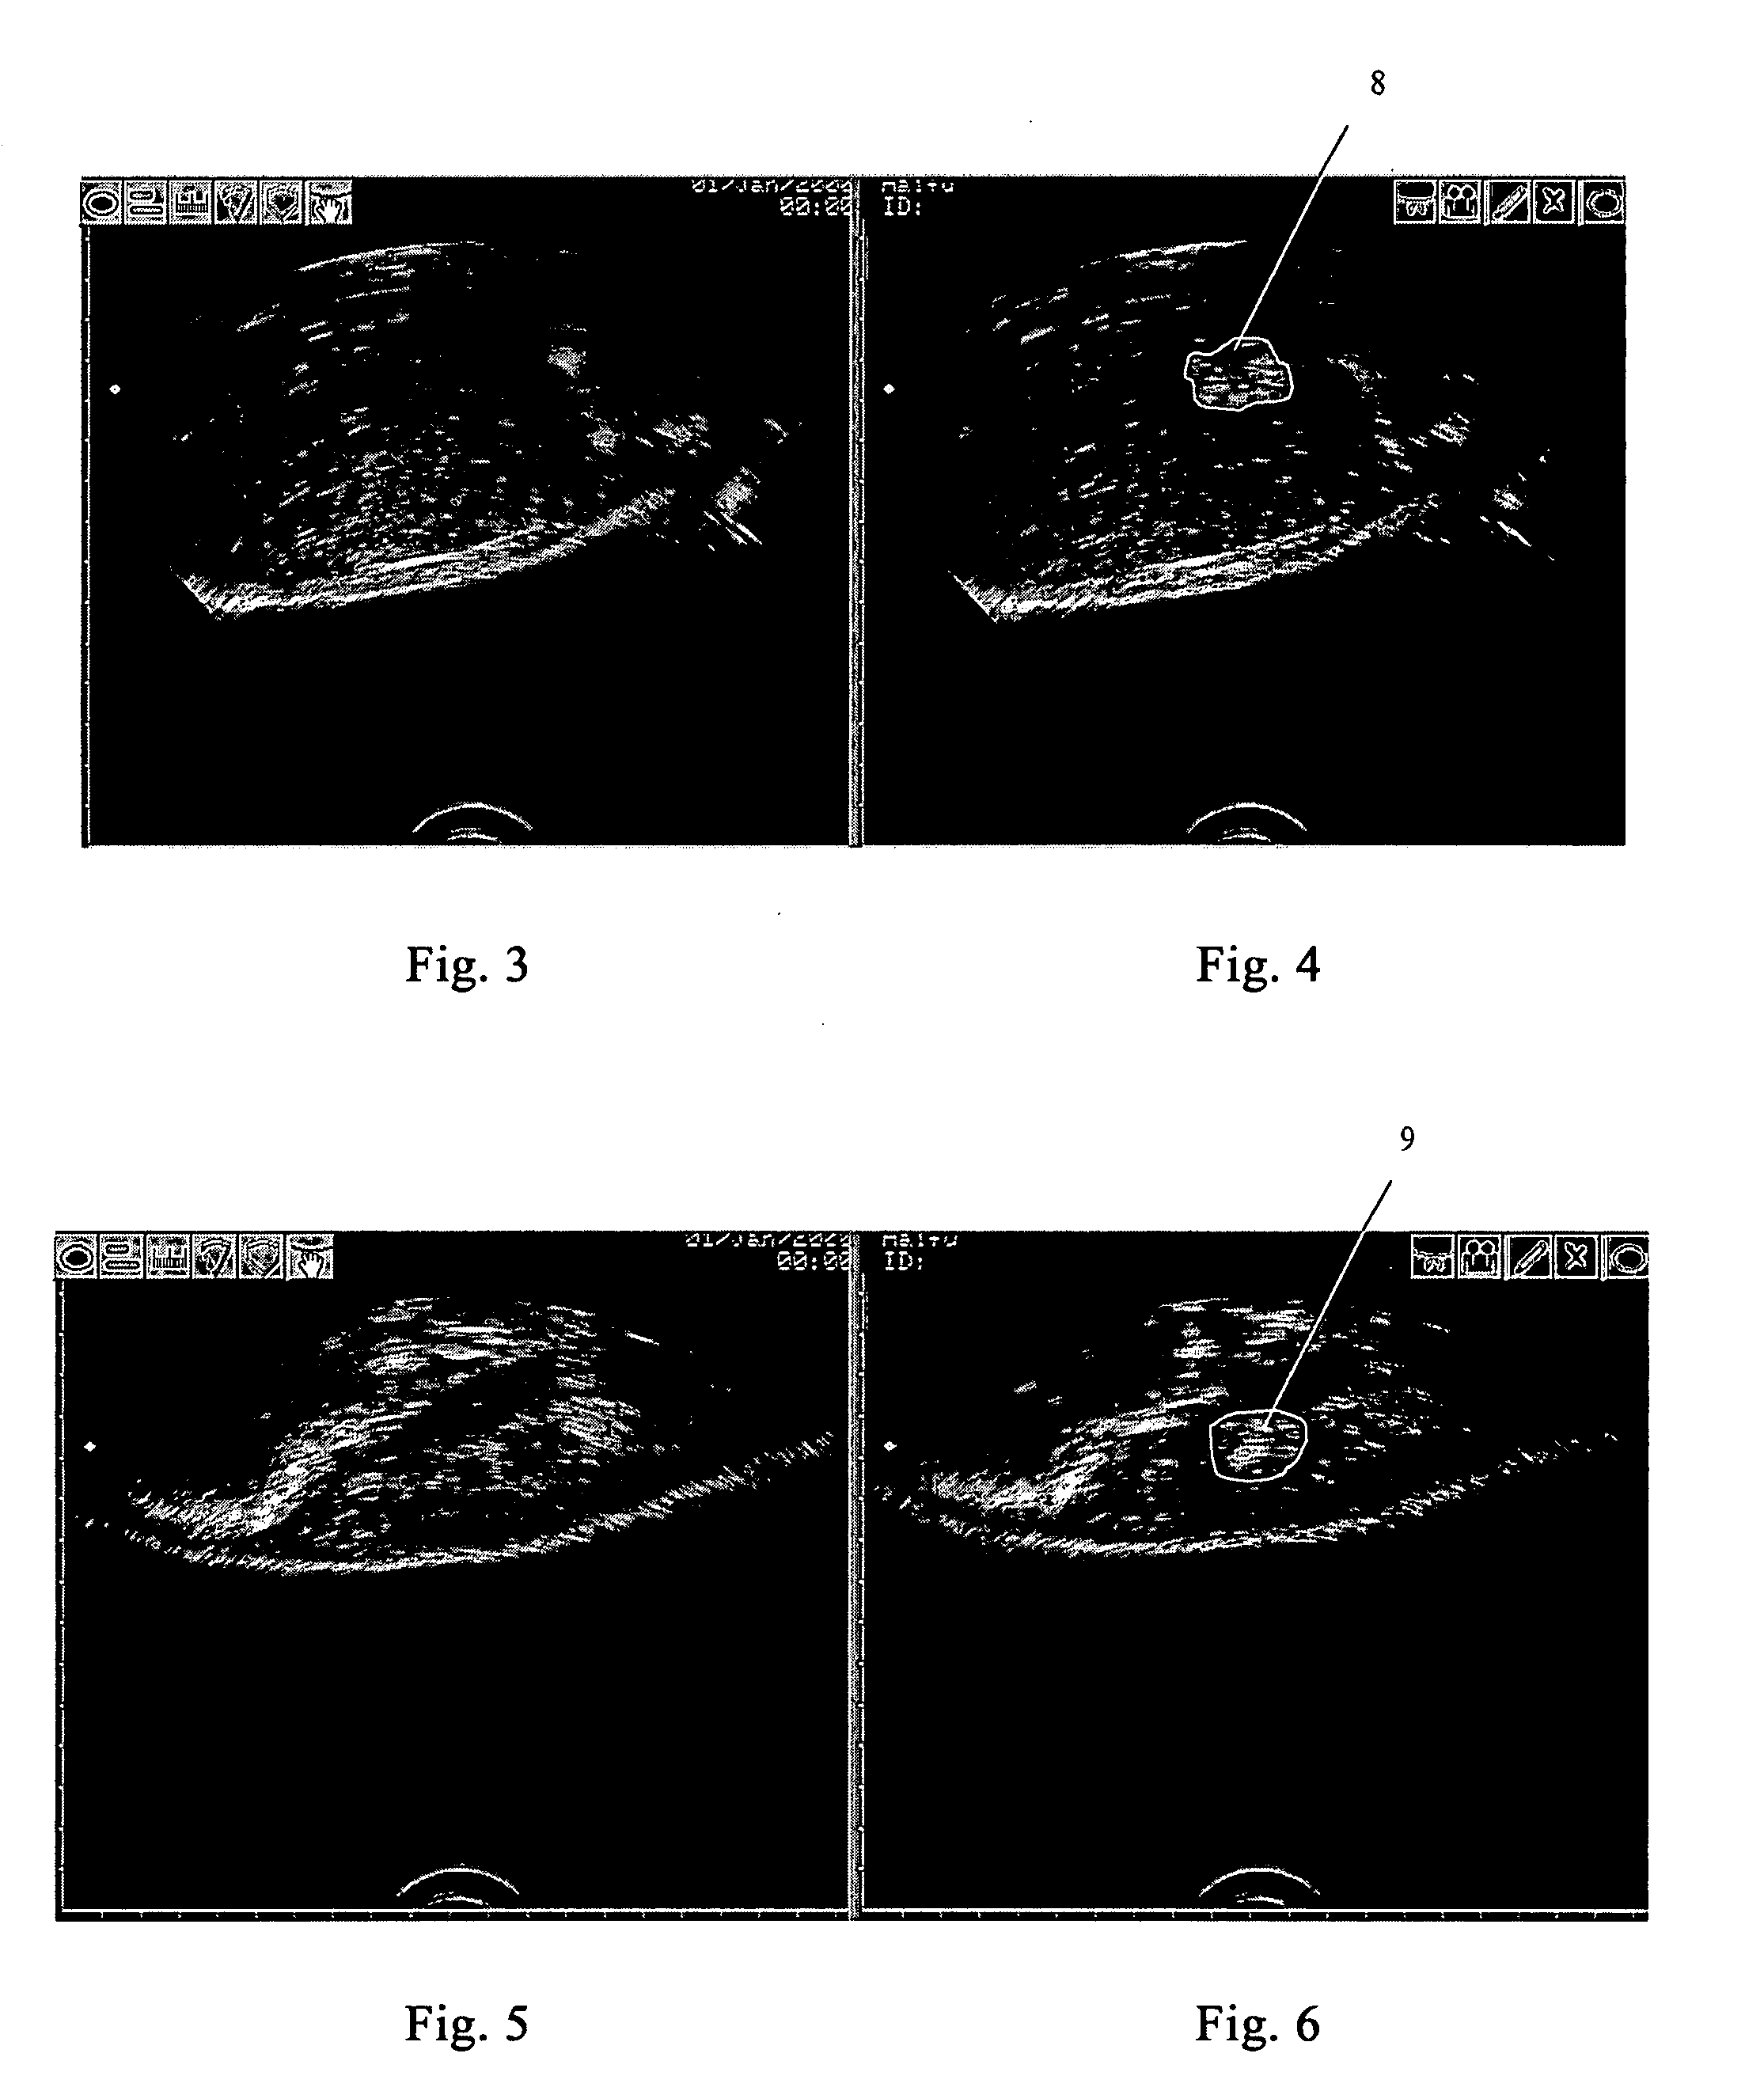 Method and Apparatus for High-Intensity Focused Ultrasound Therapy